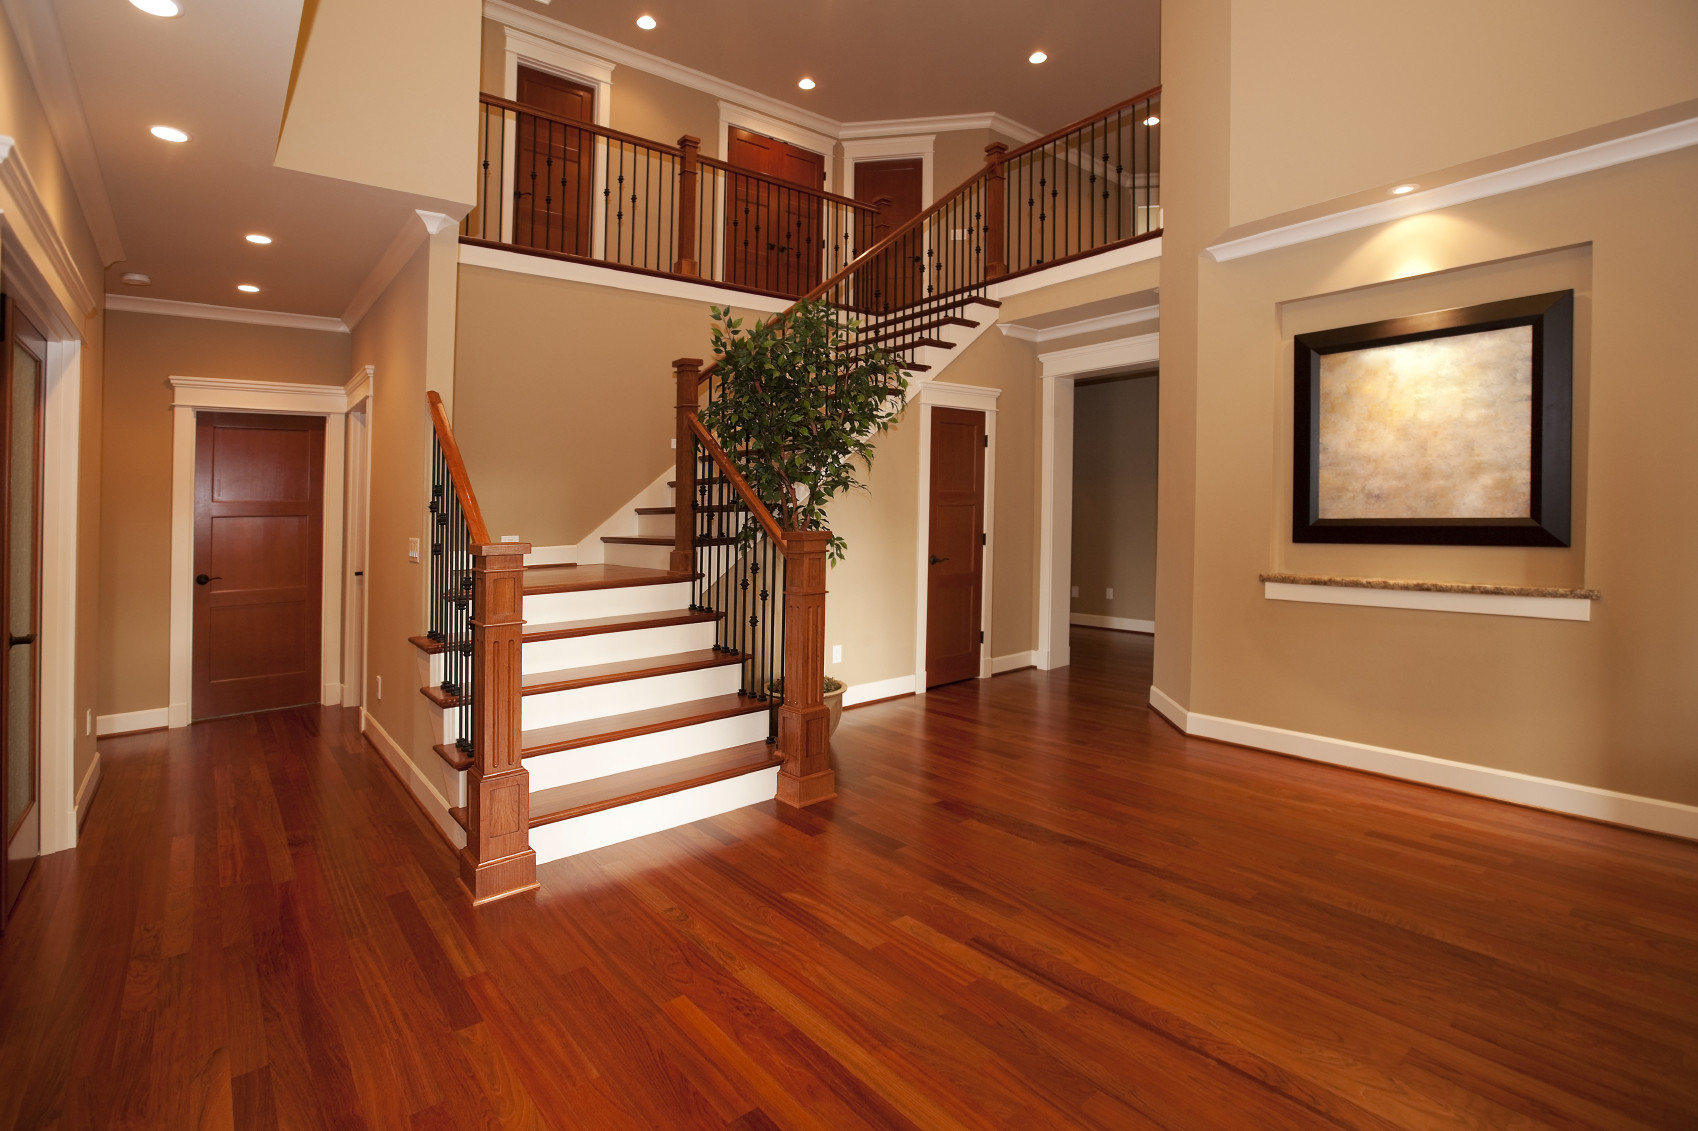 28 Recommended Pictures Of Hardwood Floors with White Trim 2024 free download pictures of hardwood floors with white trim of wood floors with wood trim dq03 roccommunity inside well liked trammell floor co nc63